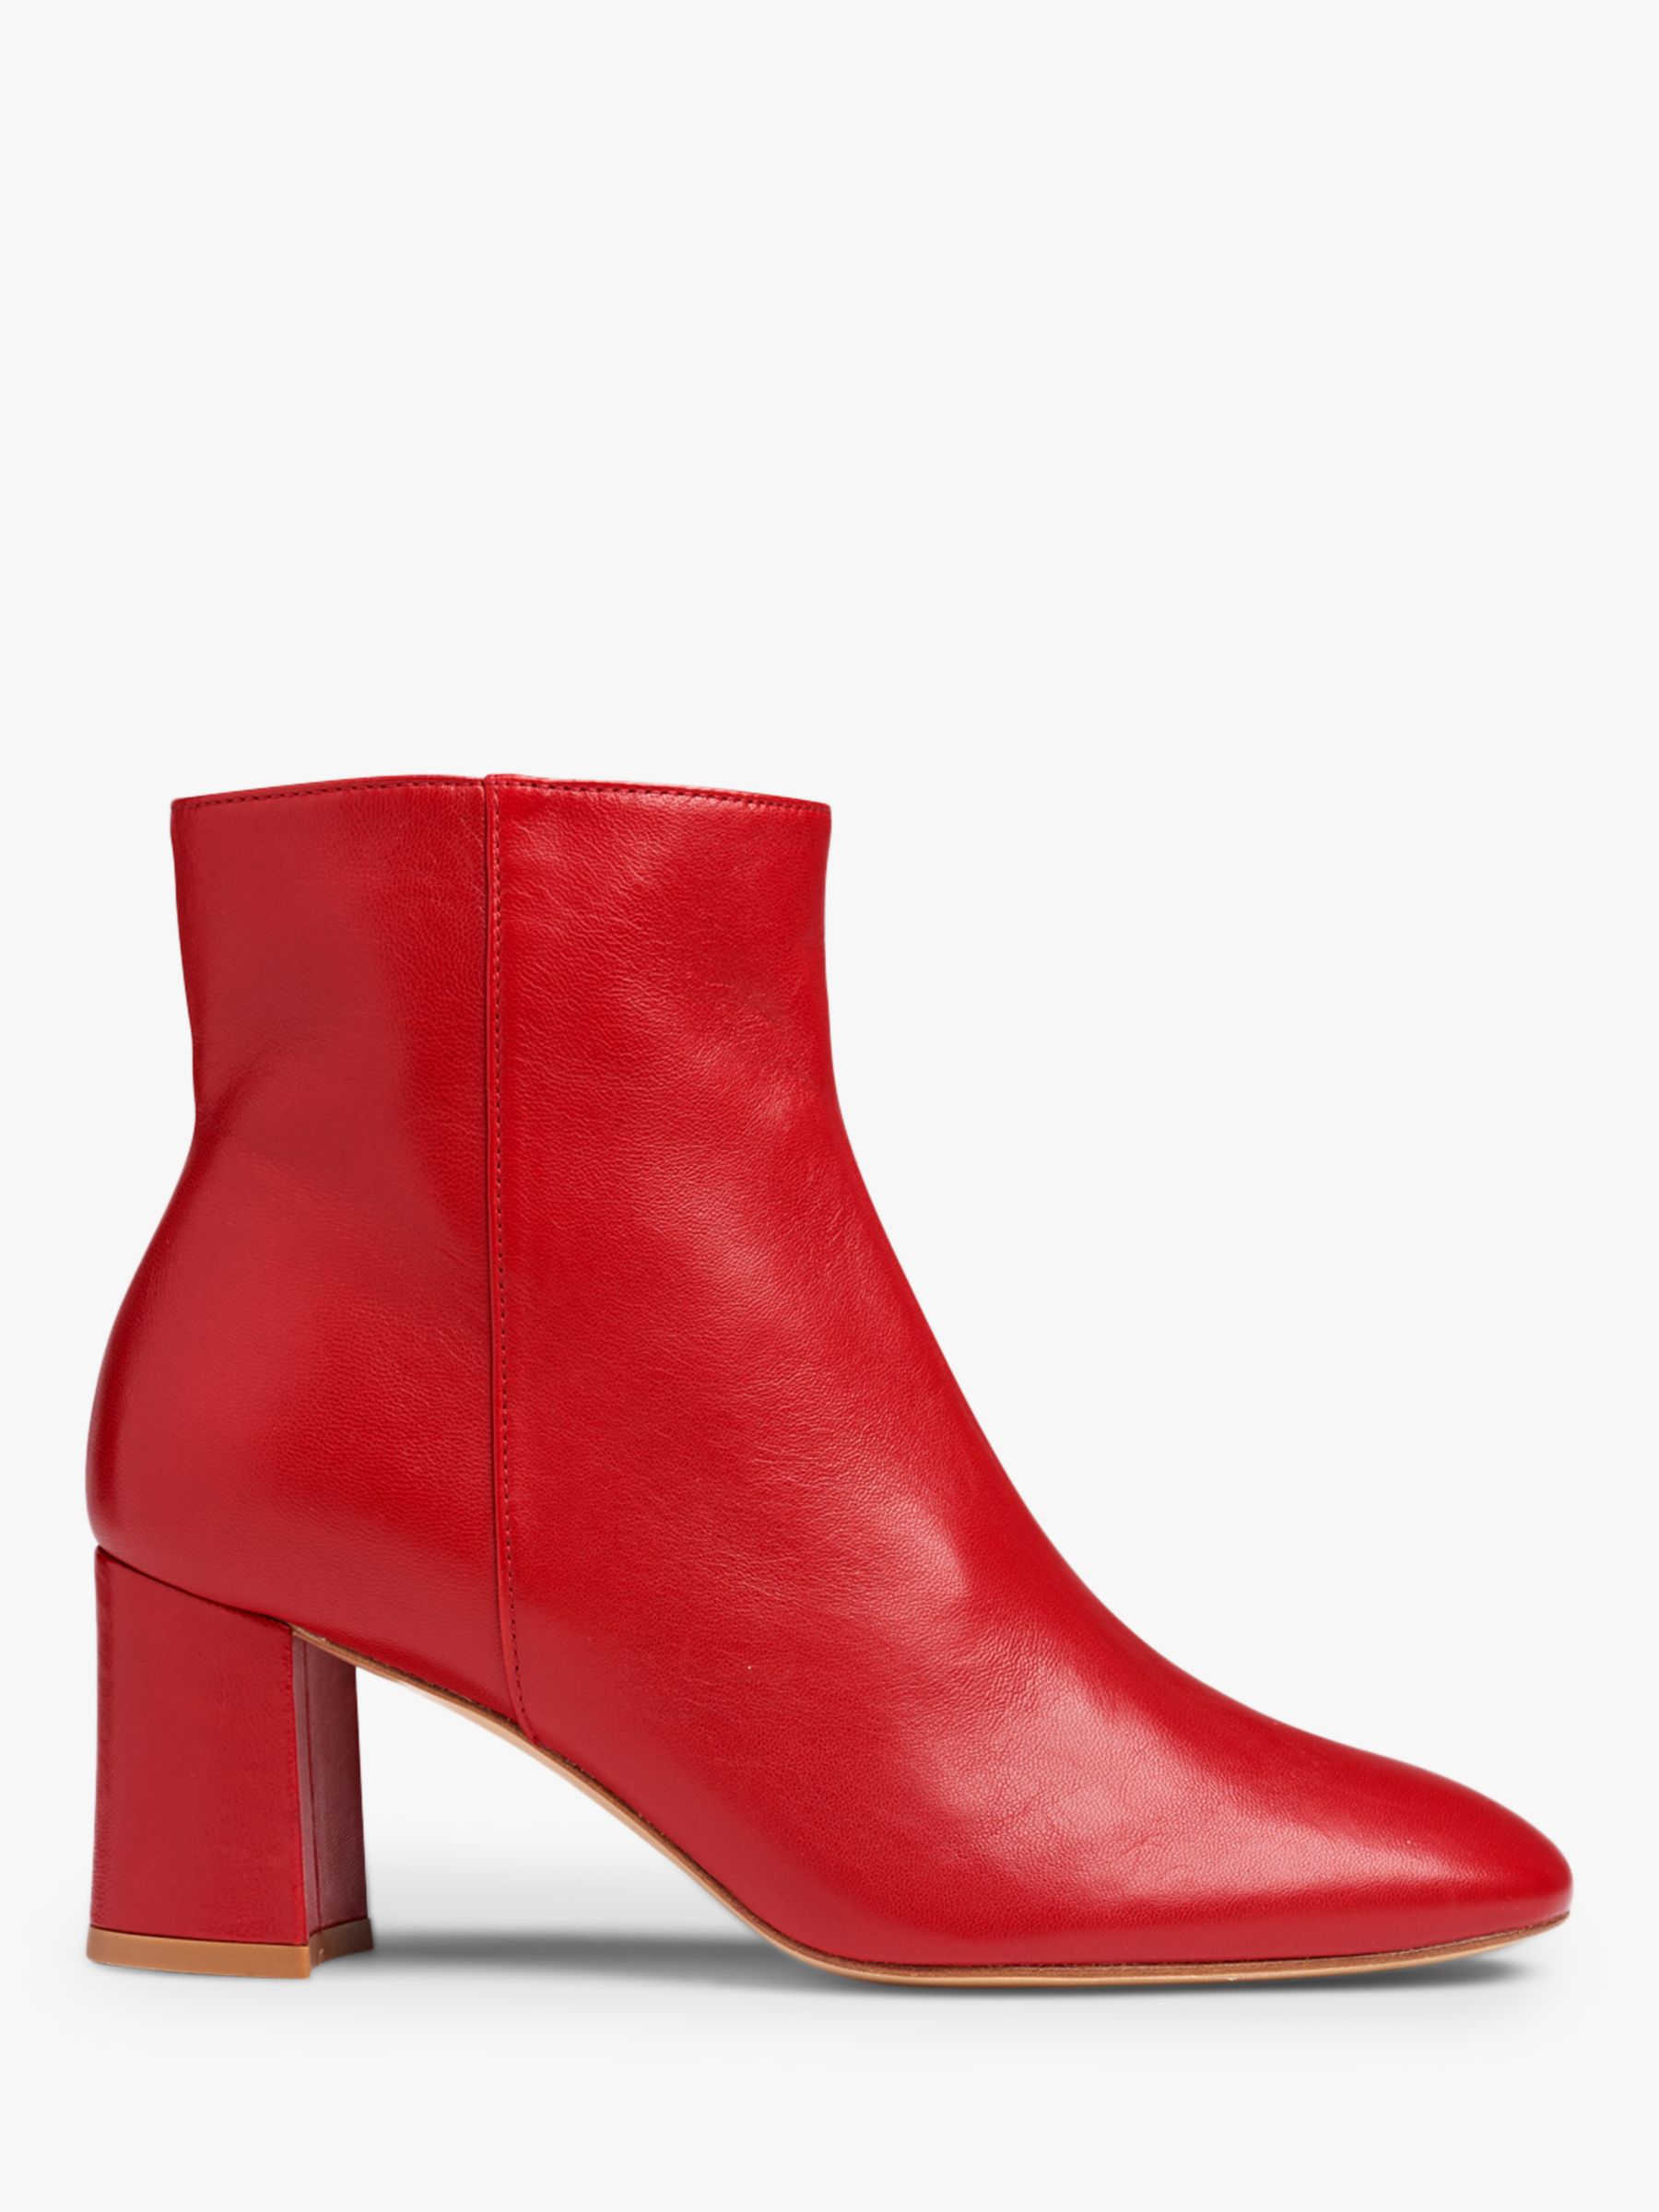 L.K.Bennett Jette Leather Ankle Boots at John Lewis & Partners